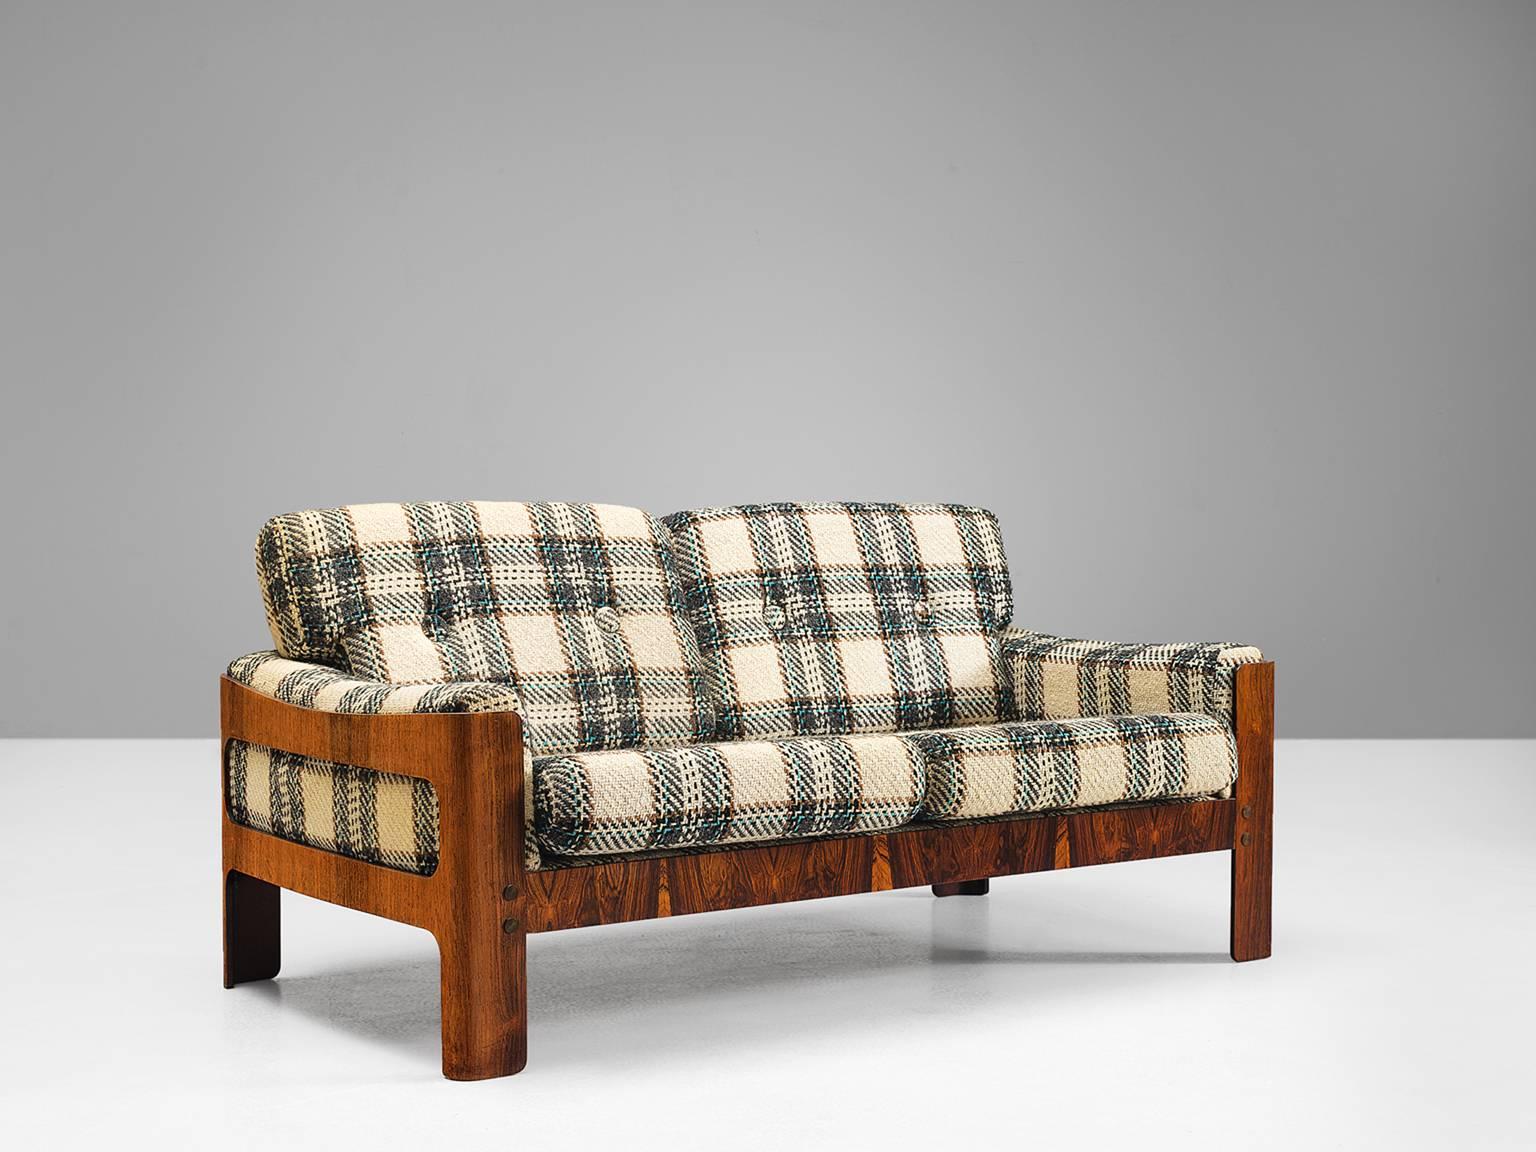 Sofa, rosewood, wool, Denmark, 1950s.

This sofa exists of a rosewood basket with thick comfortable woolen cushions. Robust and comfortable sofa. This three-seat sofa is strong and simplistic at the same time. The warm grains of the rosewood that